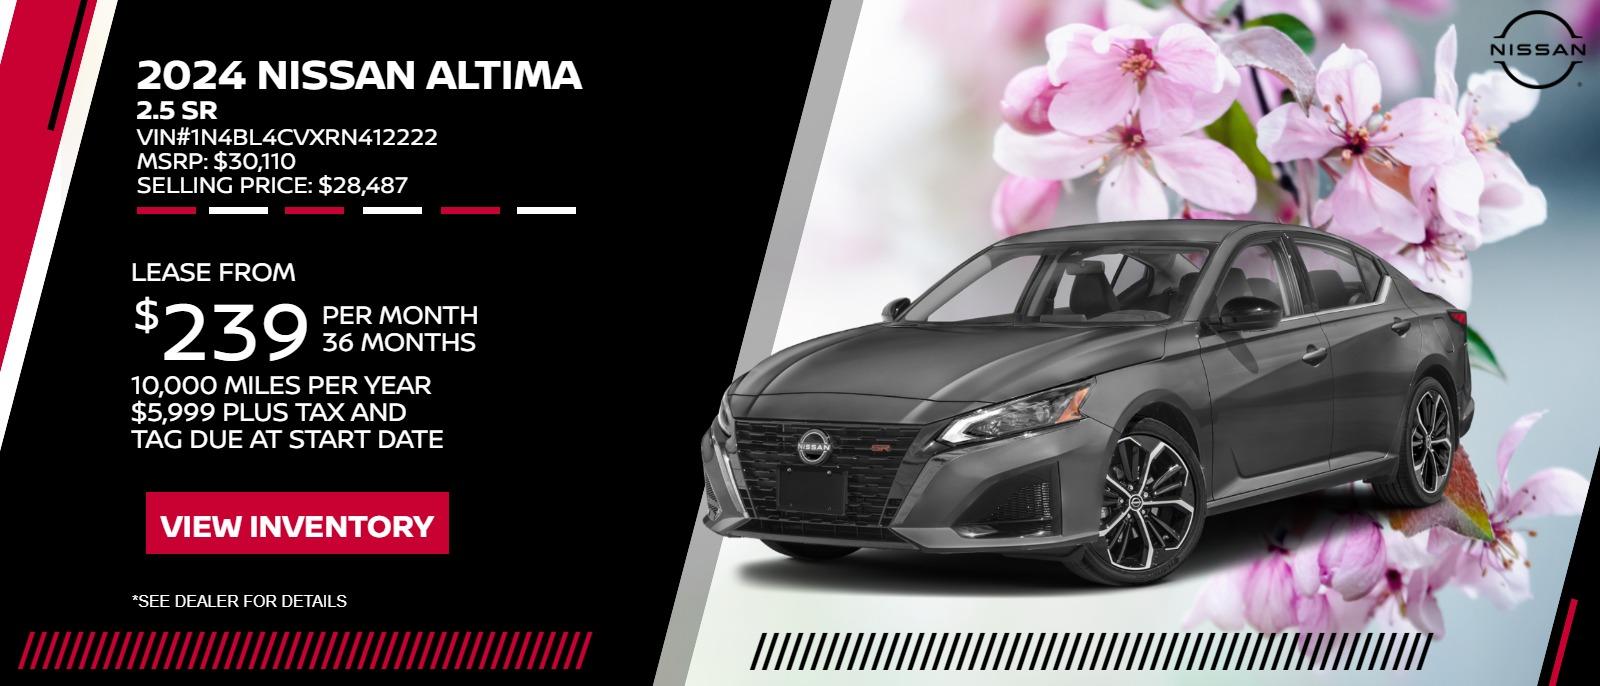 2024 Altima 2.5 SR
VIN # 1N4BL4CVXRN412222
Lease From
36 months
10,000 miles per year
$ 239
w/ $5,999 plus tax and tag due at start
Selling Price: $28,487
See dealer for details